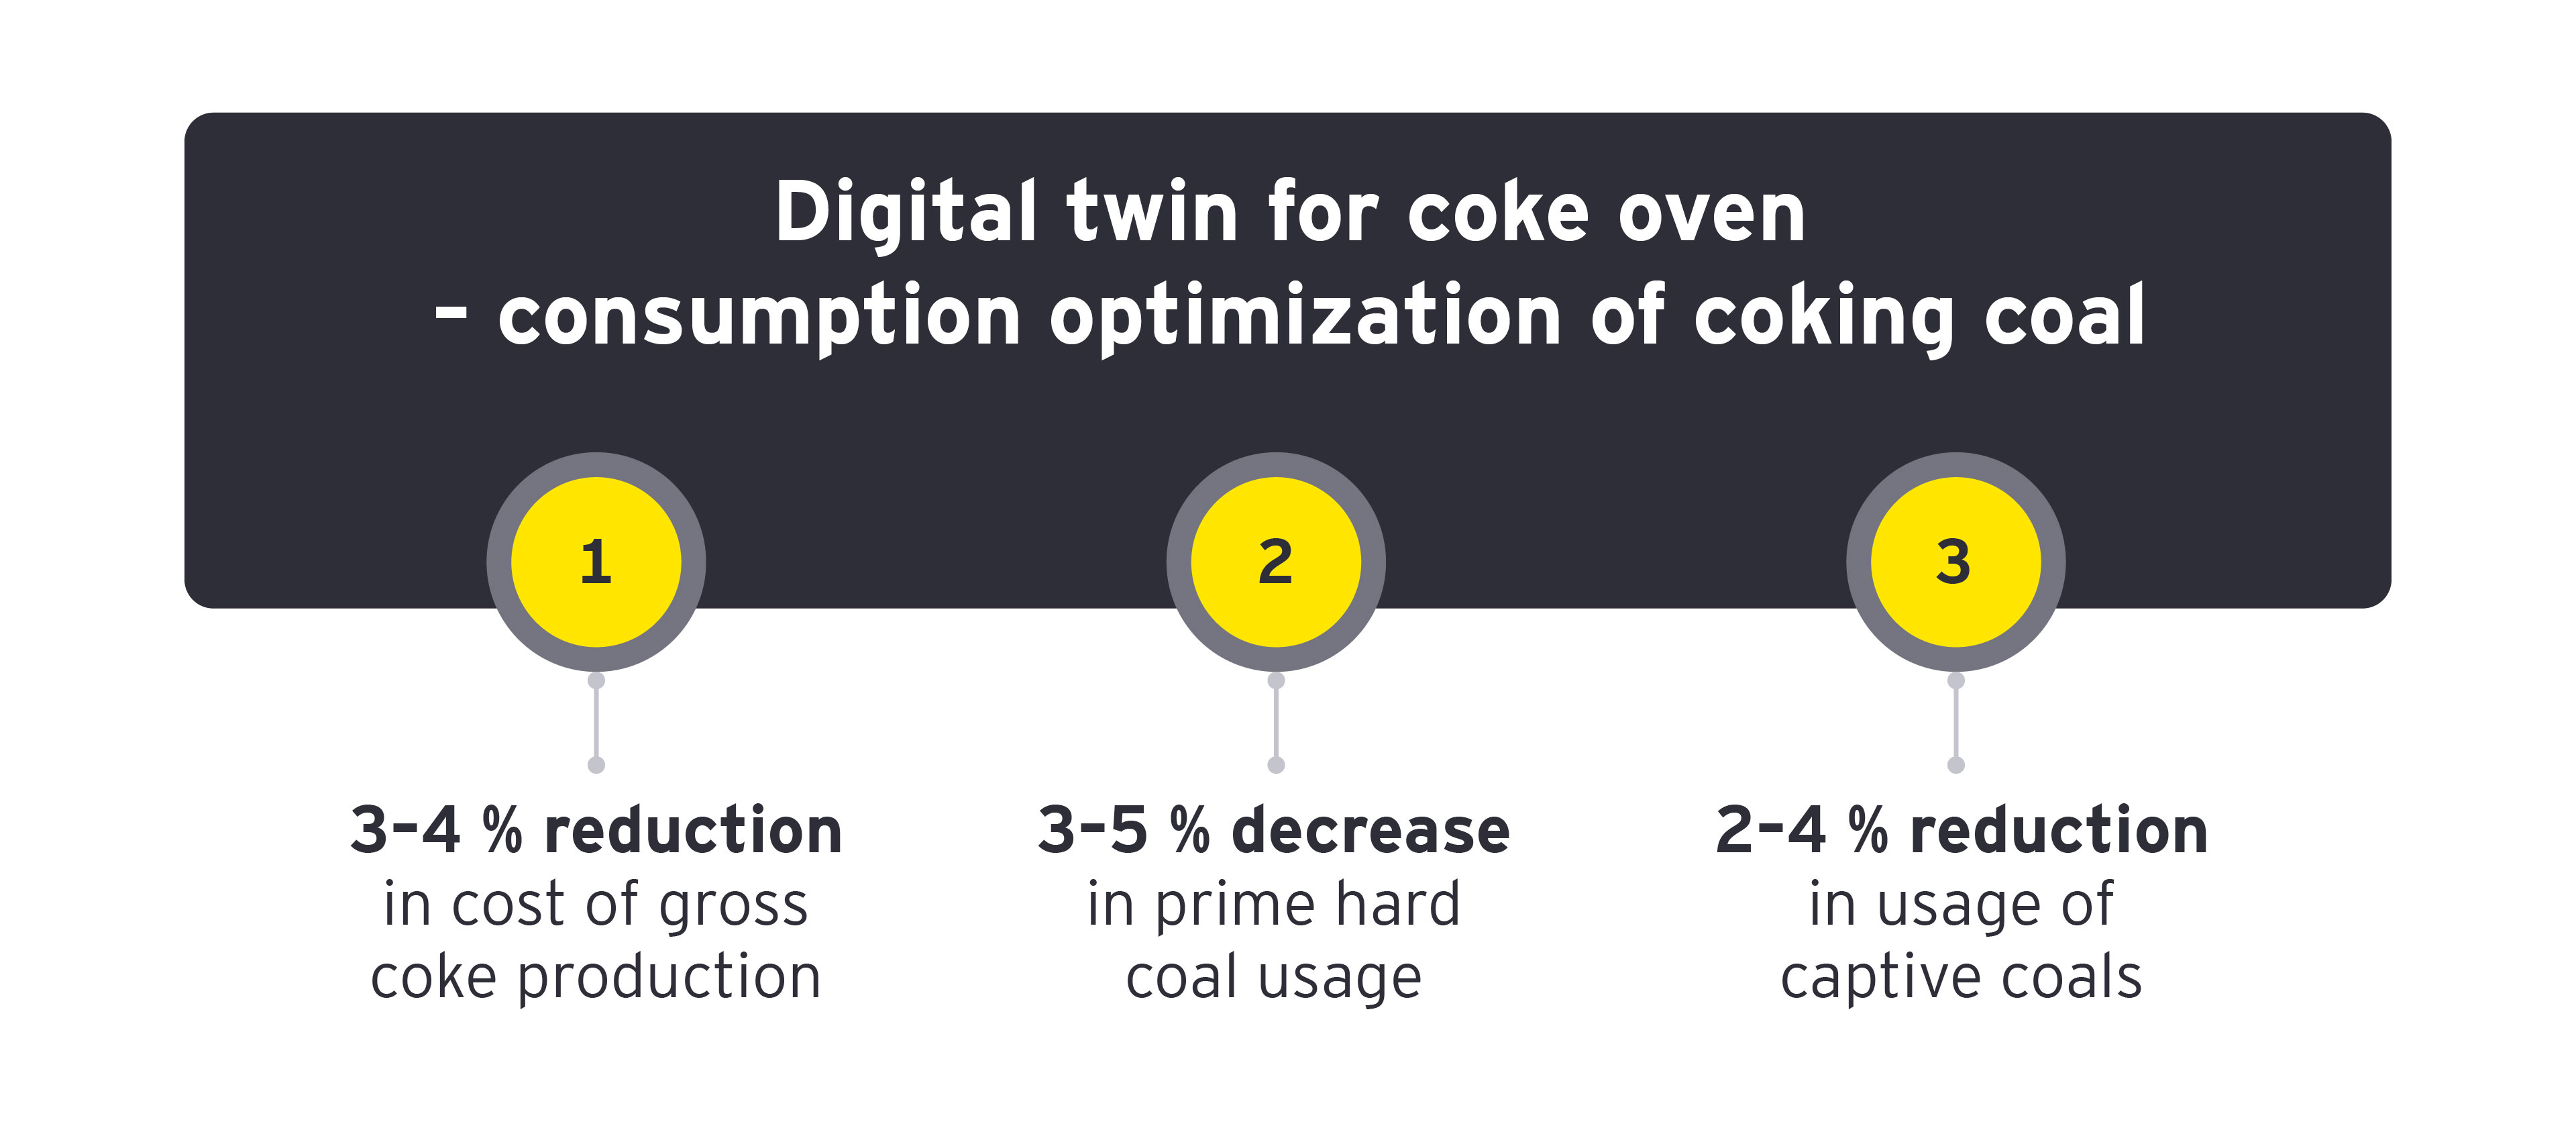 Digital twin for coke oven – consumption optimization of coking coal